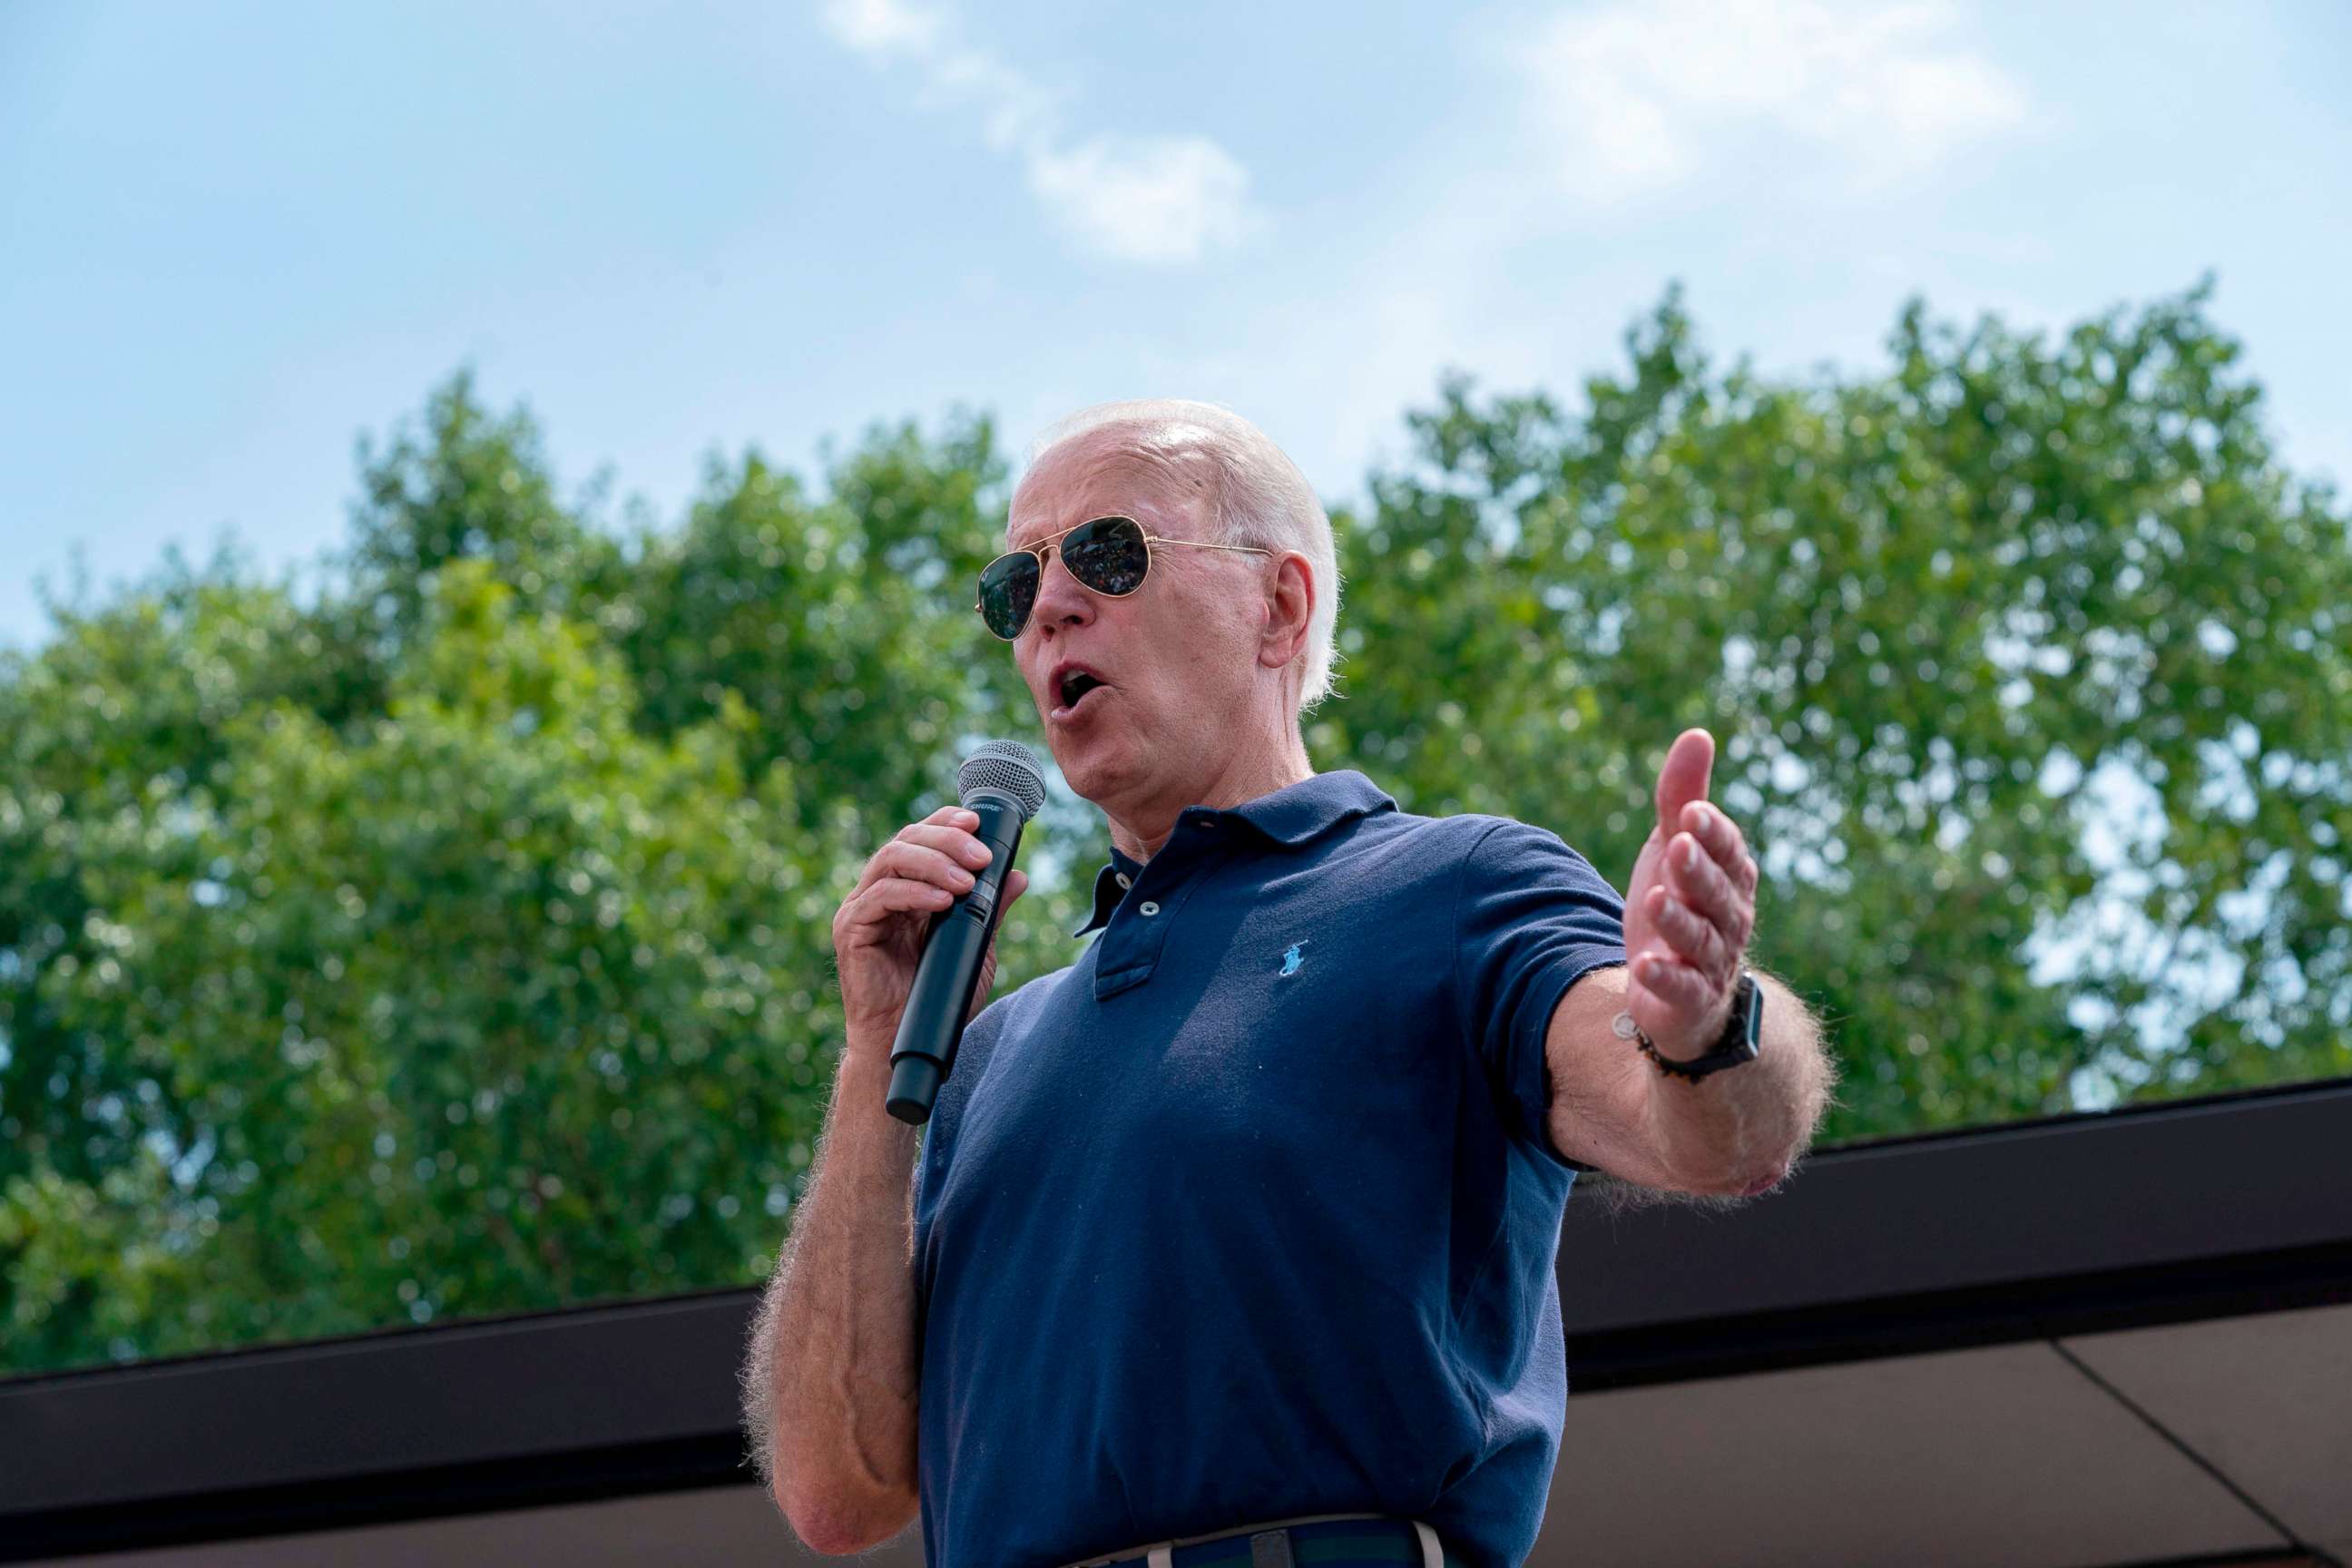 PHOTO: Democratic presidential hopeful former Vice President Joe Biden speaks at the Des Moines Register Political Soapbox during a visit to the Iowa State Fair in Des Moines, Iowa.